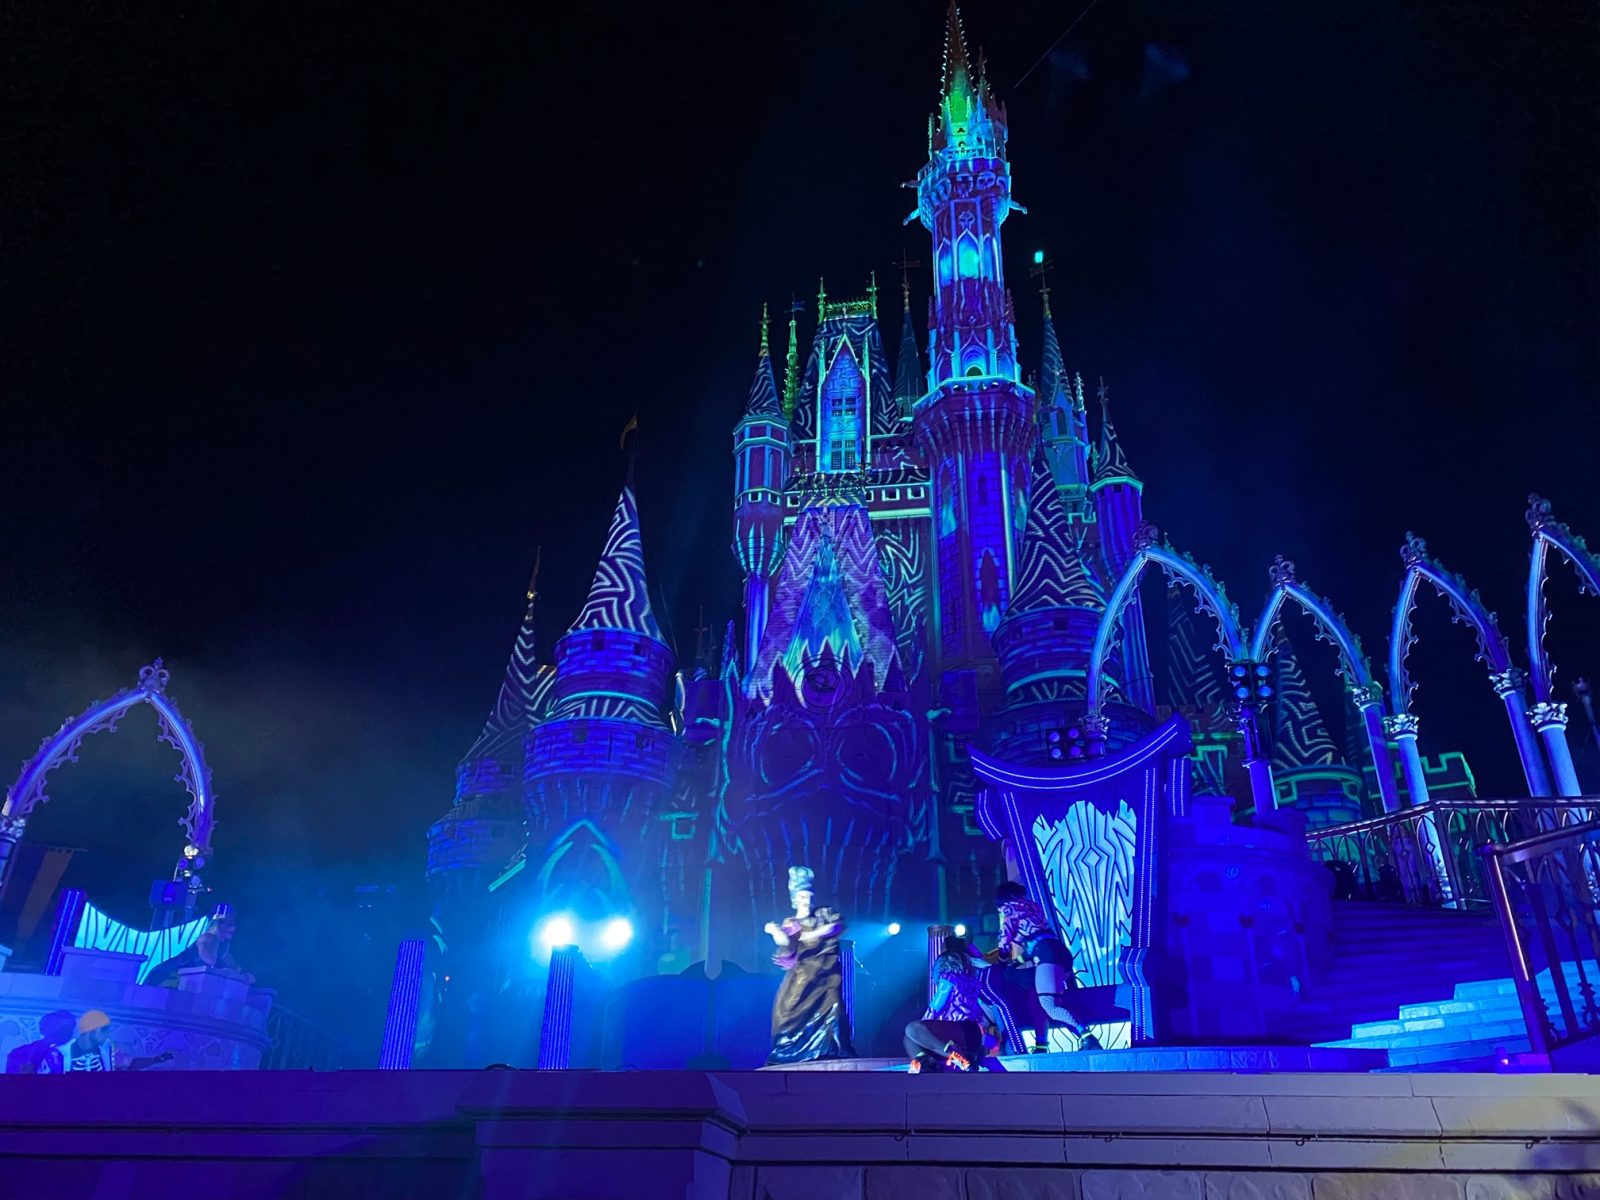 Hades stage show at Villains after hours